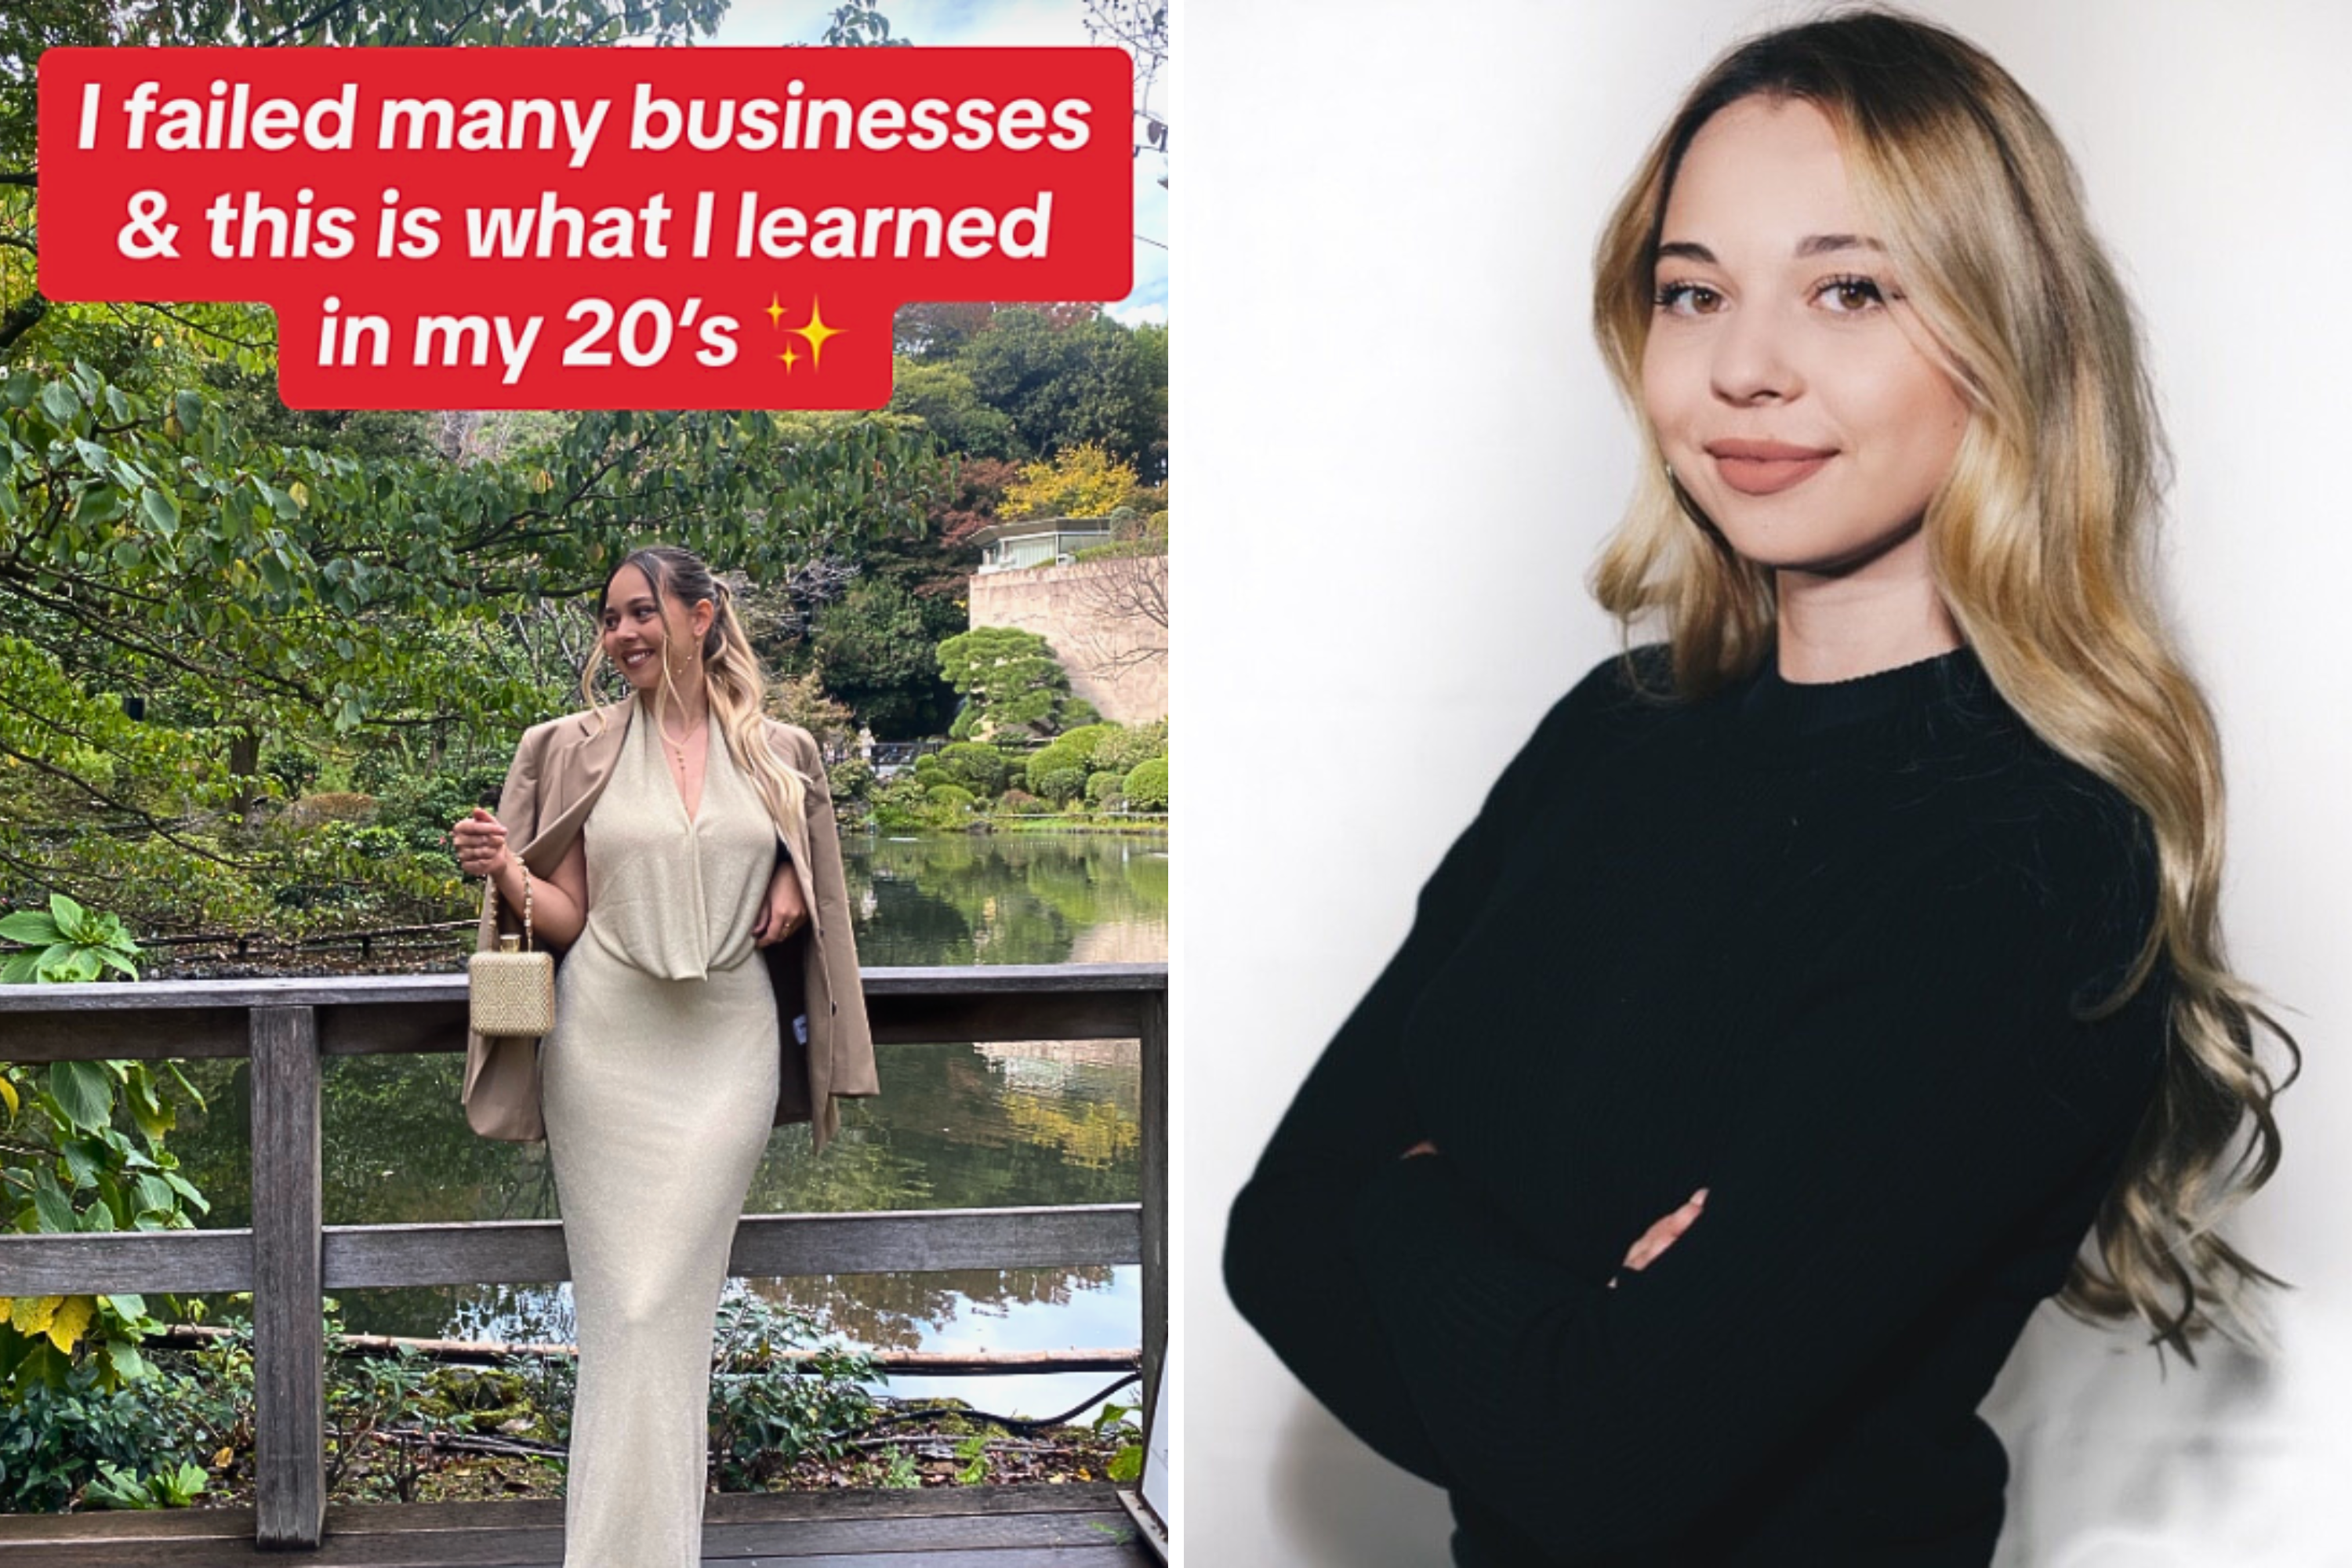 Gen Z CEO lists the failed businesses she launched before finding success